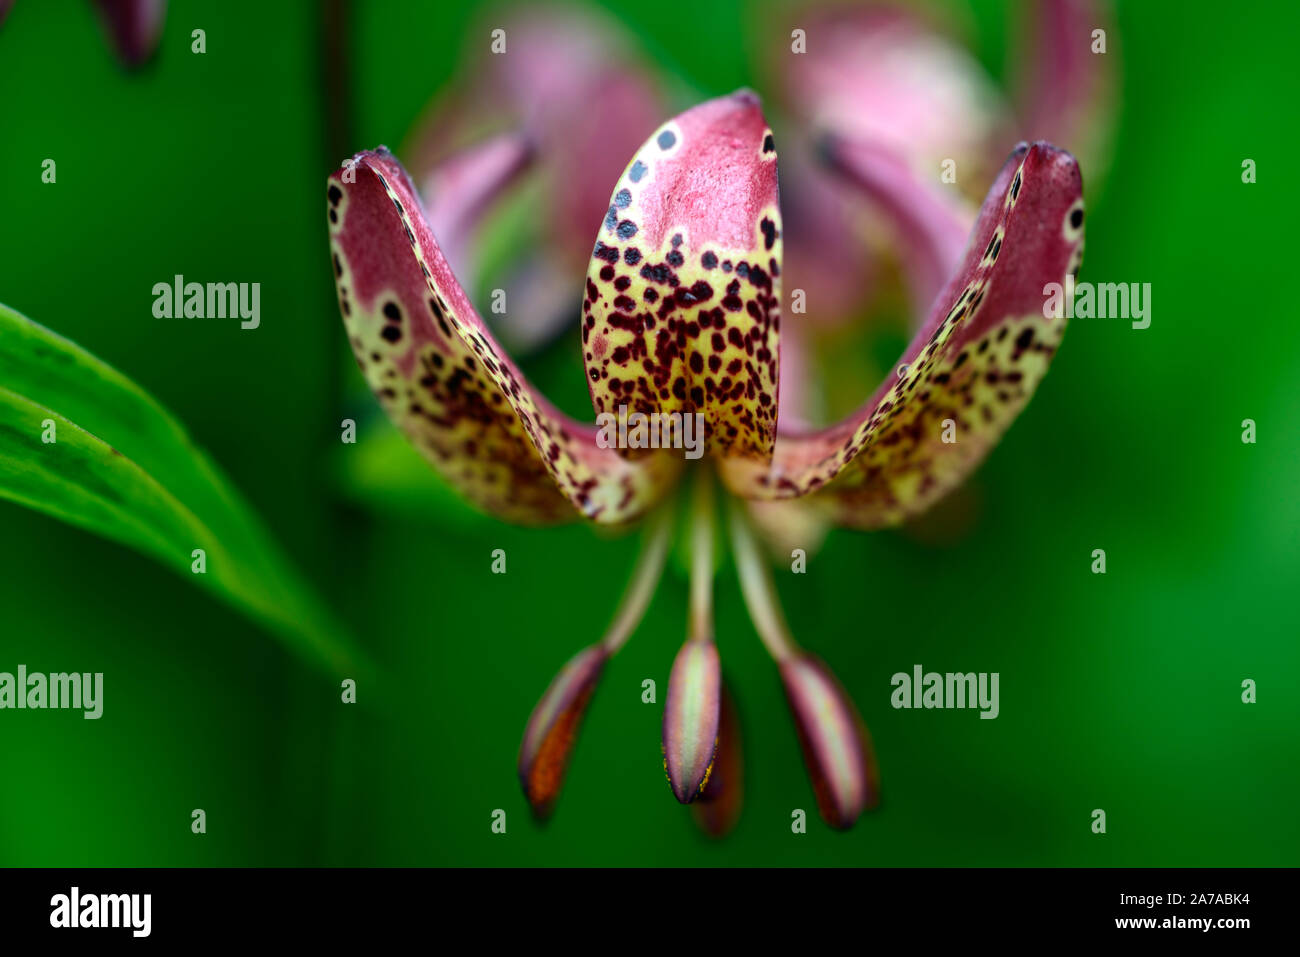 Lilium Martagon,lily, lillies, red flower,speckled, flowers,perennial,summer,shade,shady,turks cap lily,RM Floral Stock Photo